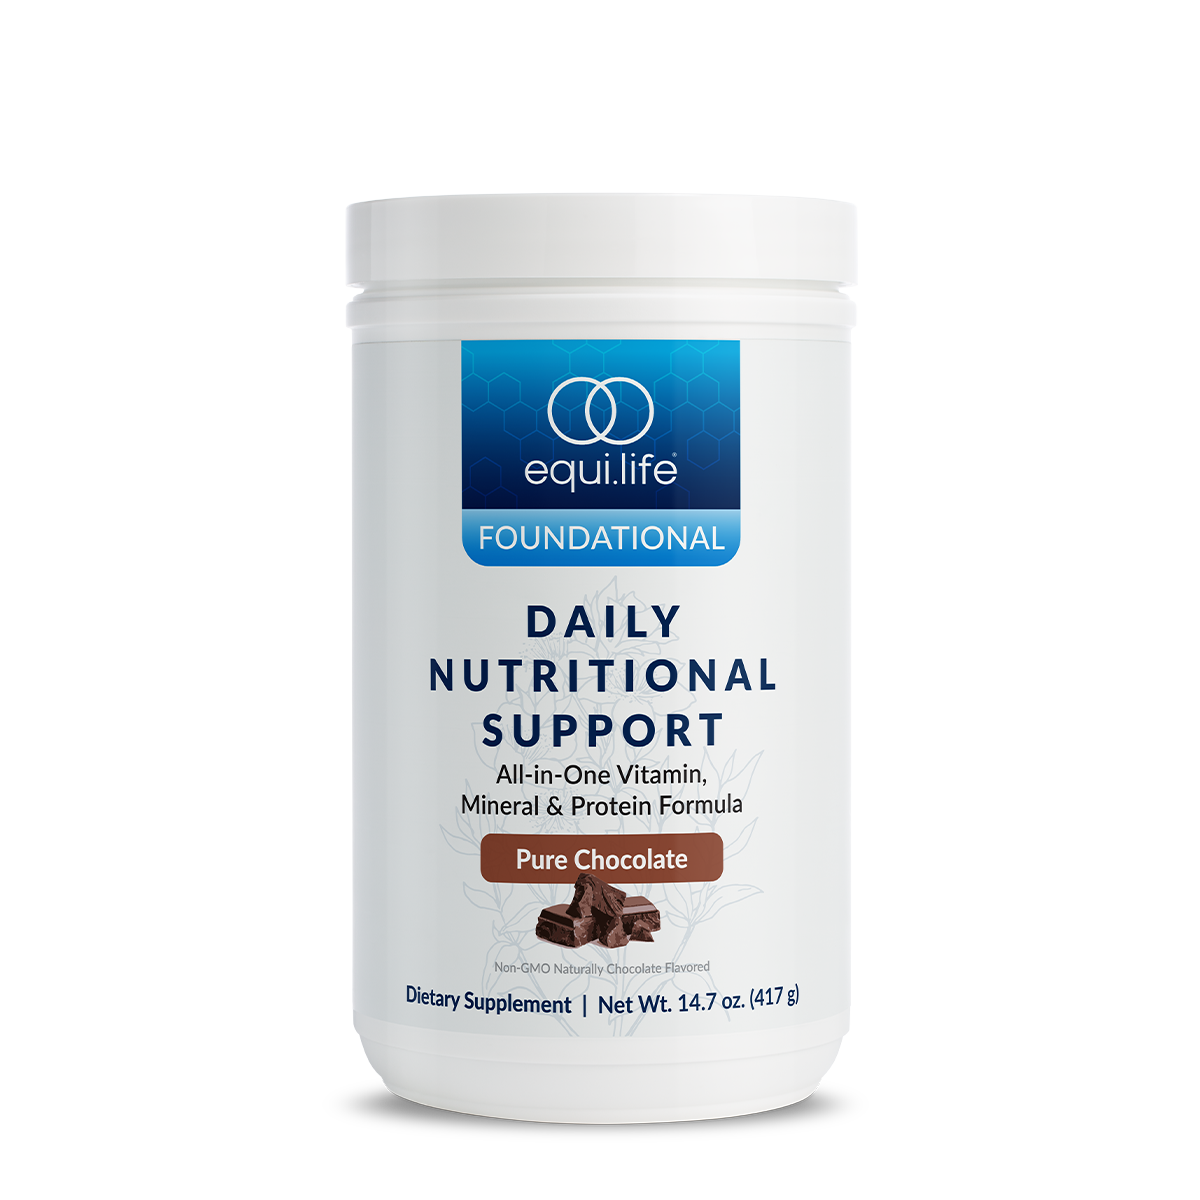 Daily Nutritional Support Pure Chocolate